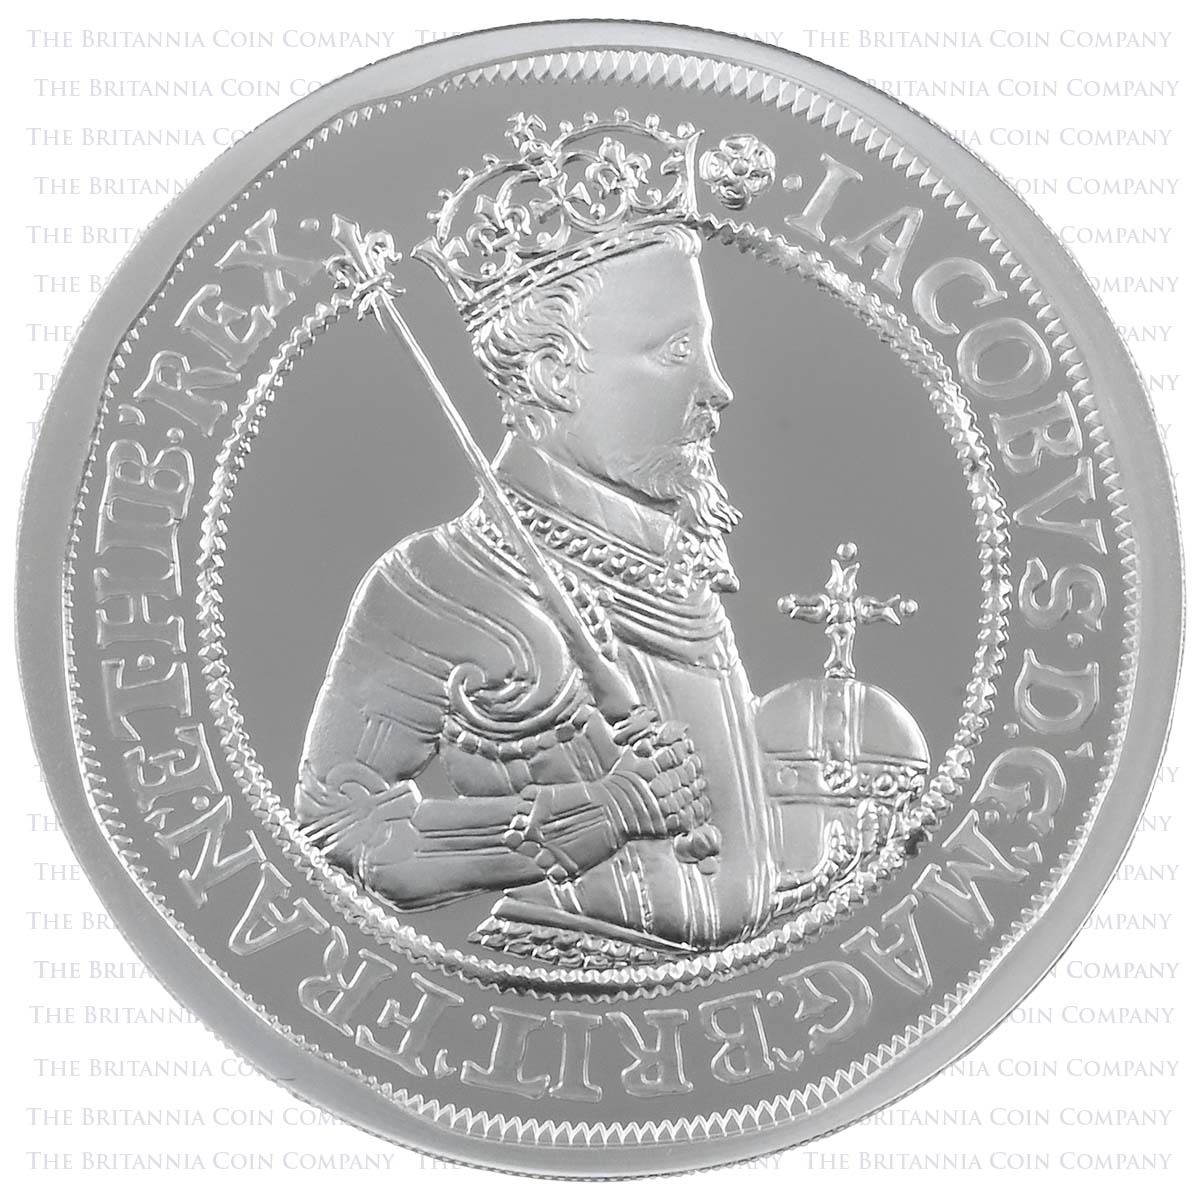 2022 British Monarchs James I 1 Ounce Silver Proof Reverse